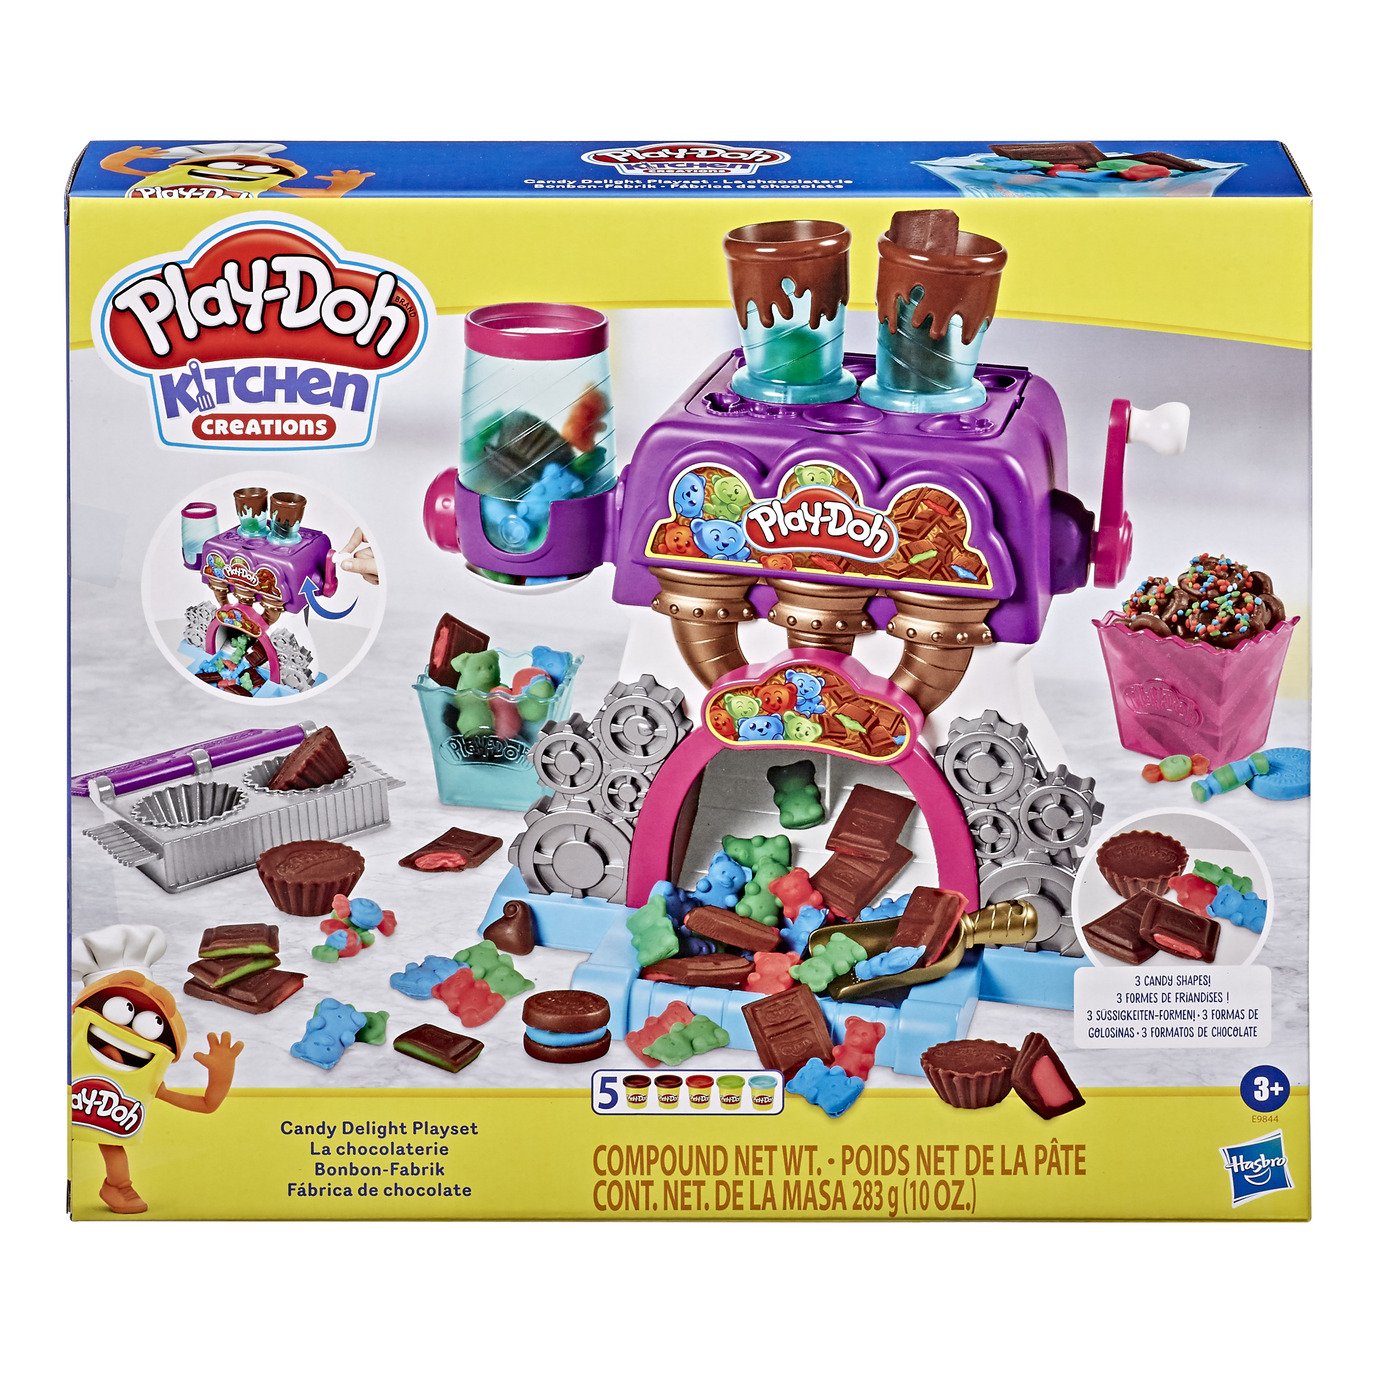 Play-Doh Kitchen Creations Candy Delight Playset Review